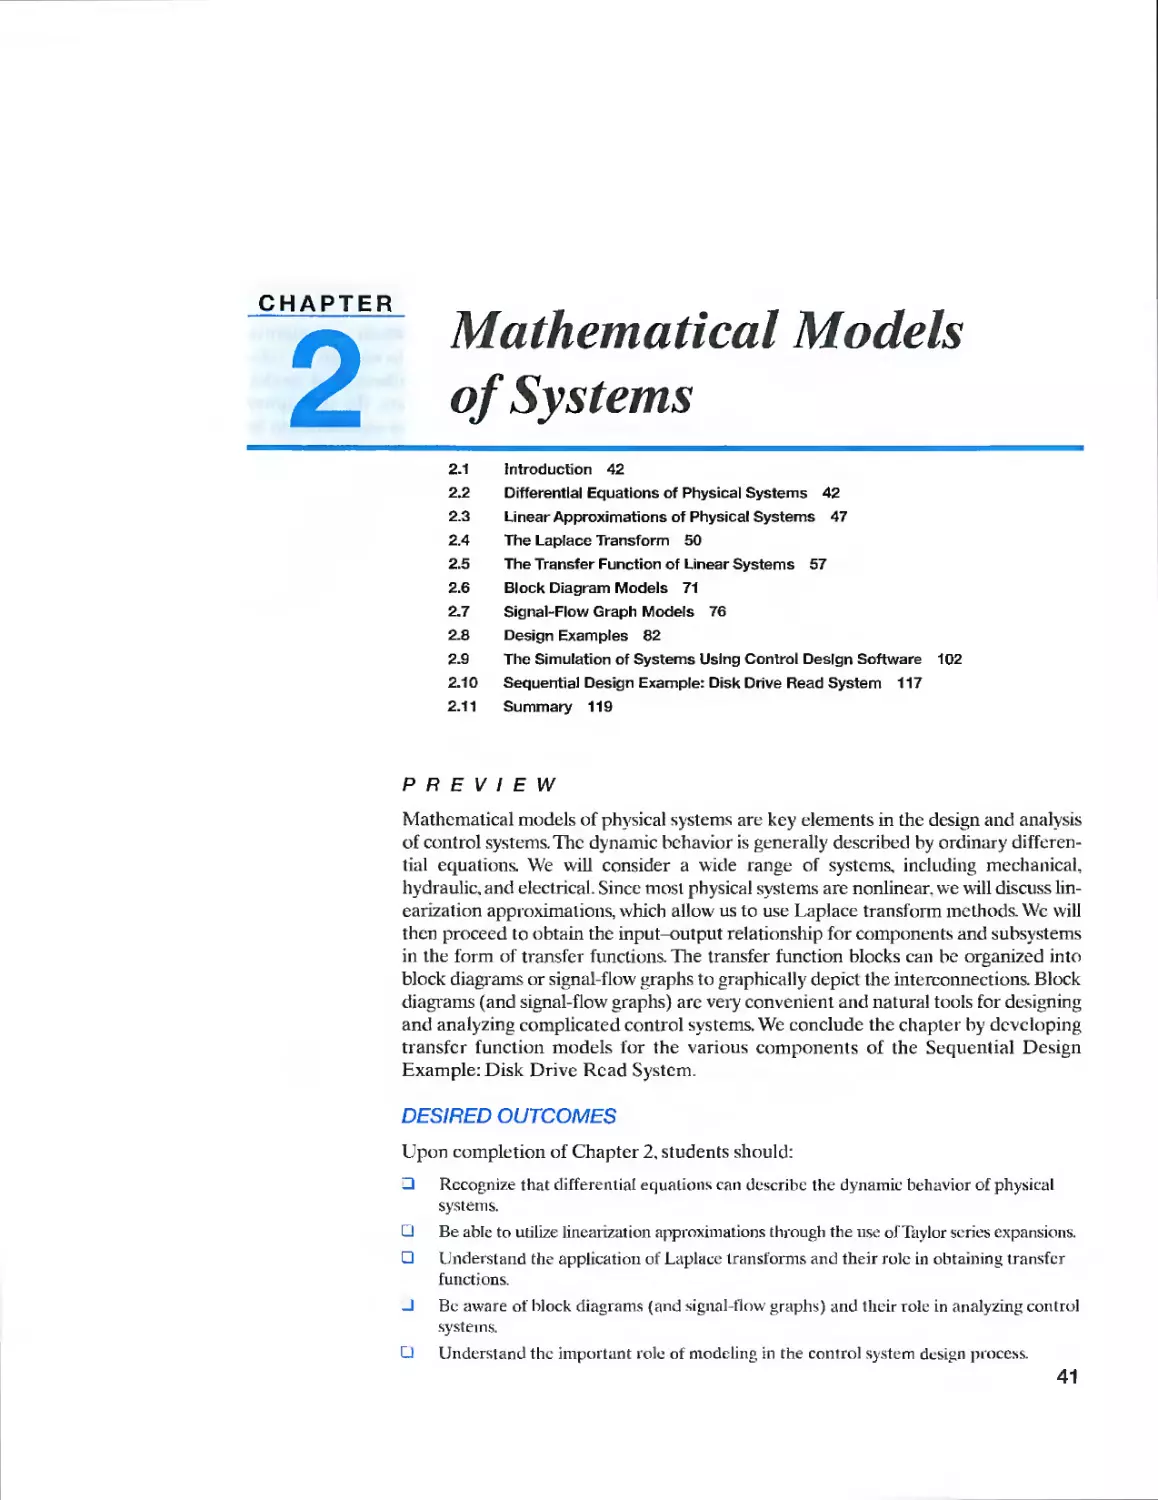 2 Mathematical Models of Systems